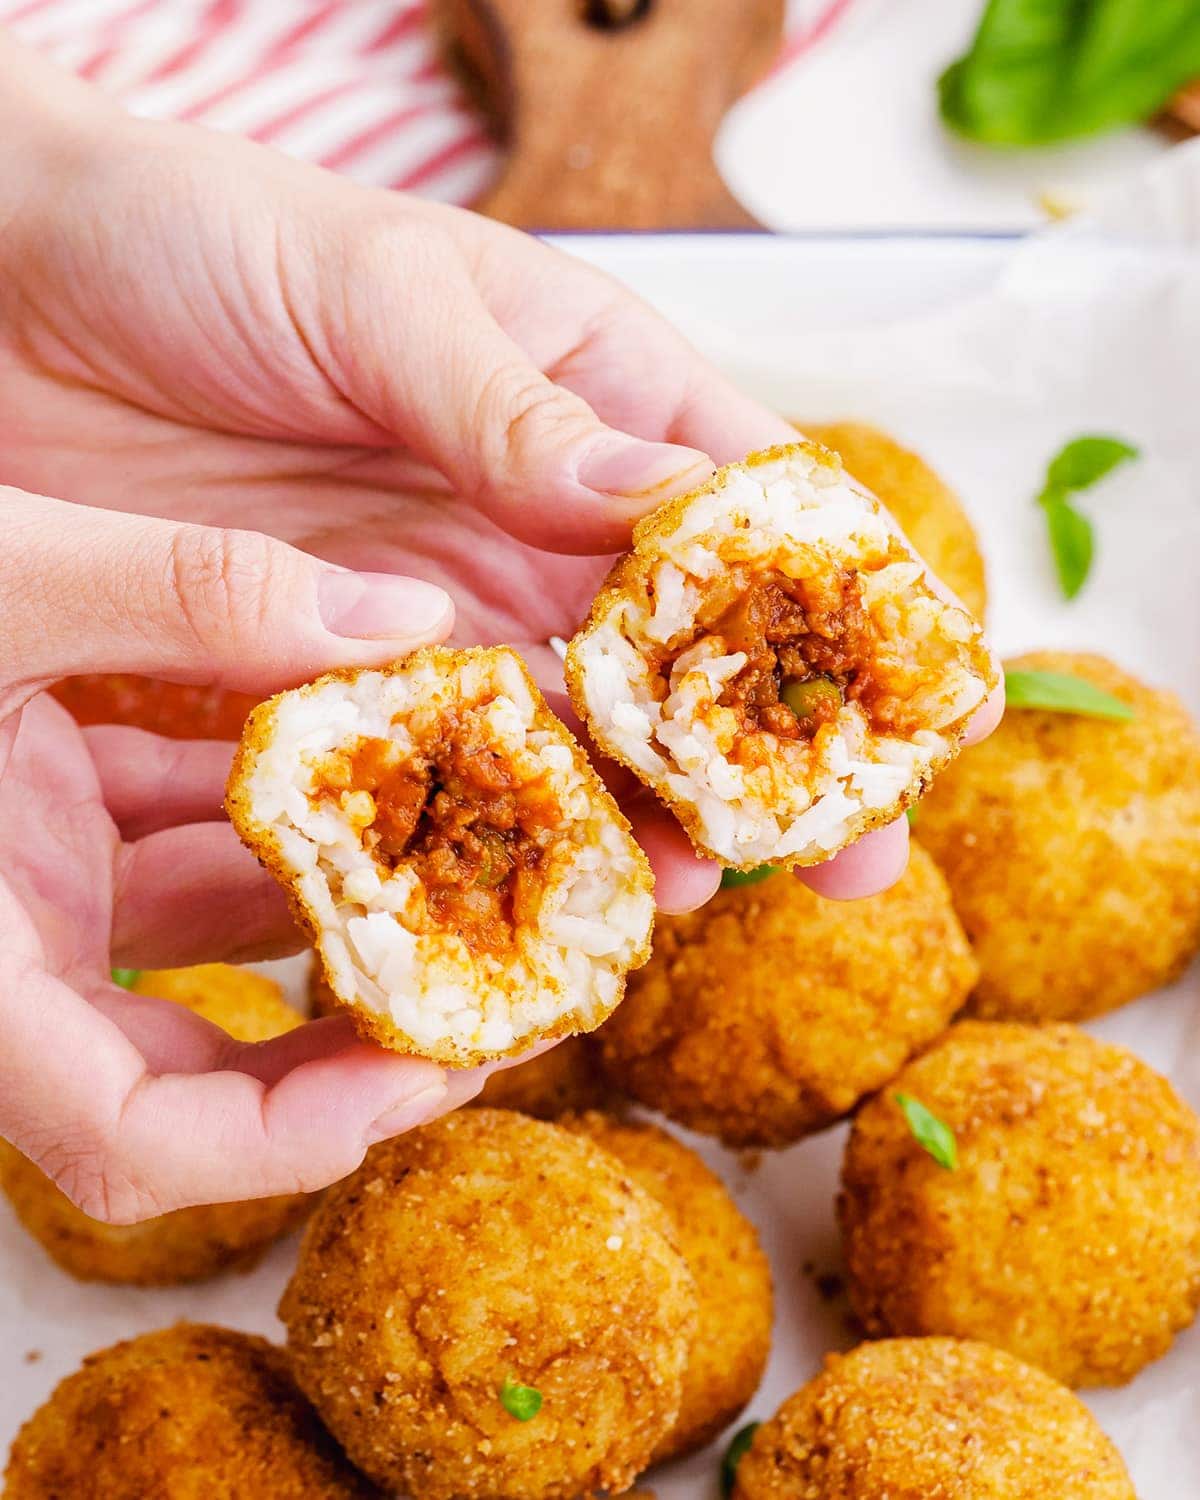 A hand holding two halves of an arancini rice ball showing the meat sauce in the middle.